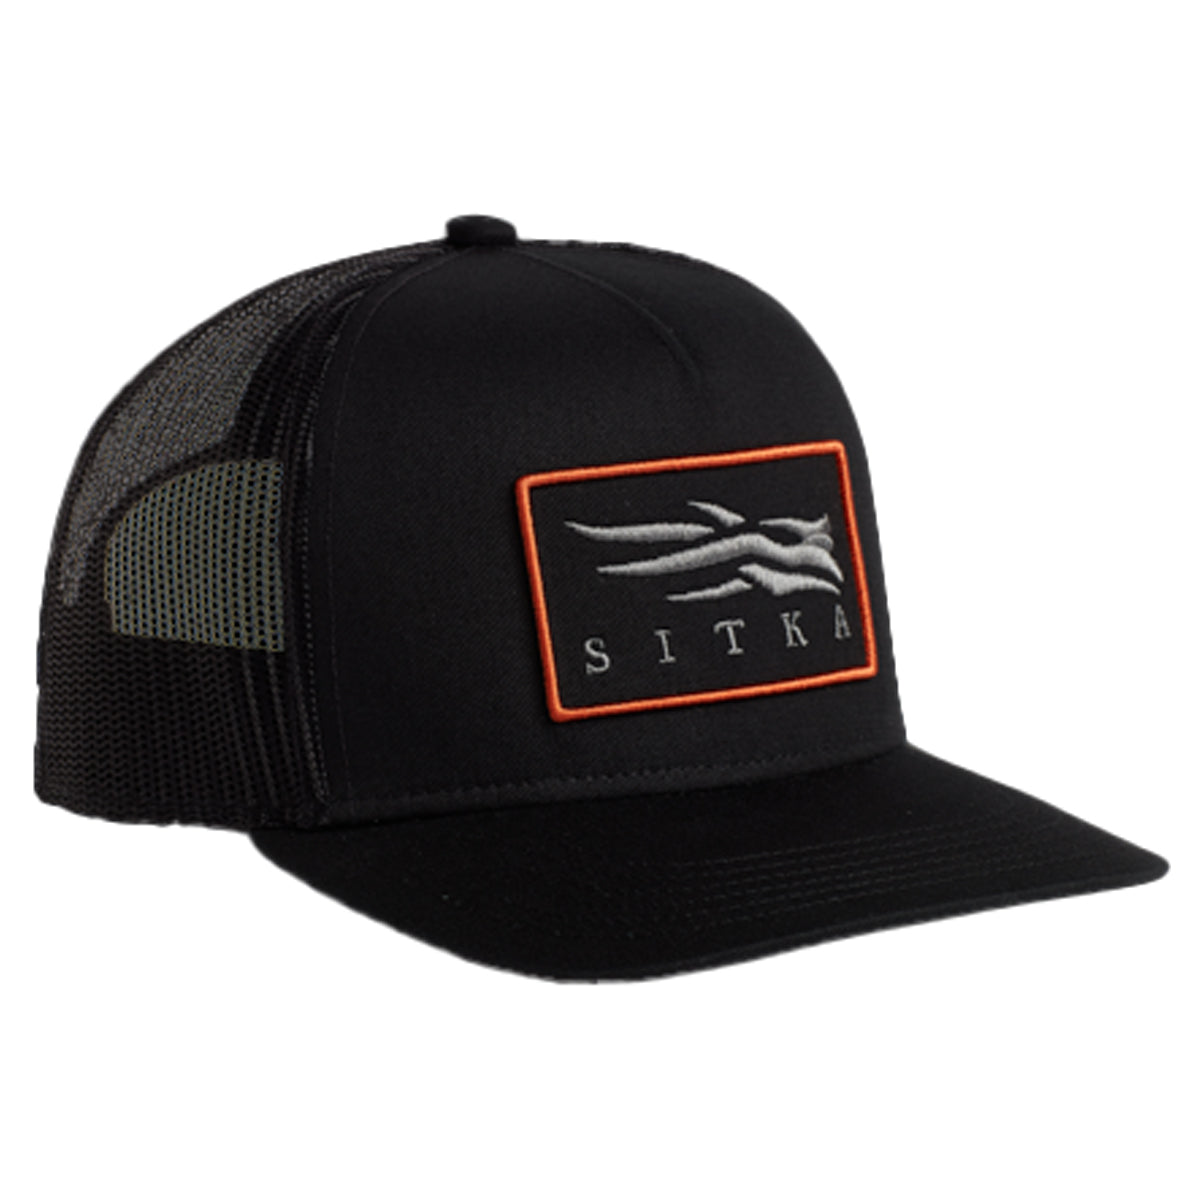 Sitka ICON Patch Hi Pro Trucker in Black by GOHUNT | Sitka - GOHUNT Shop